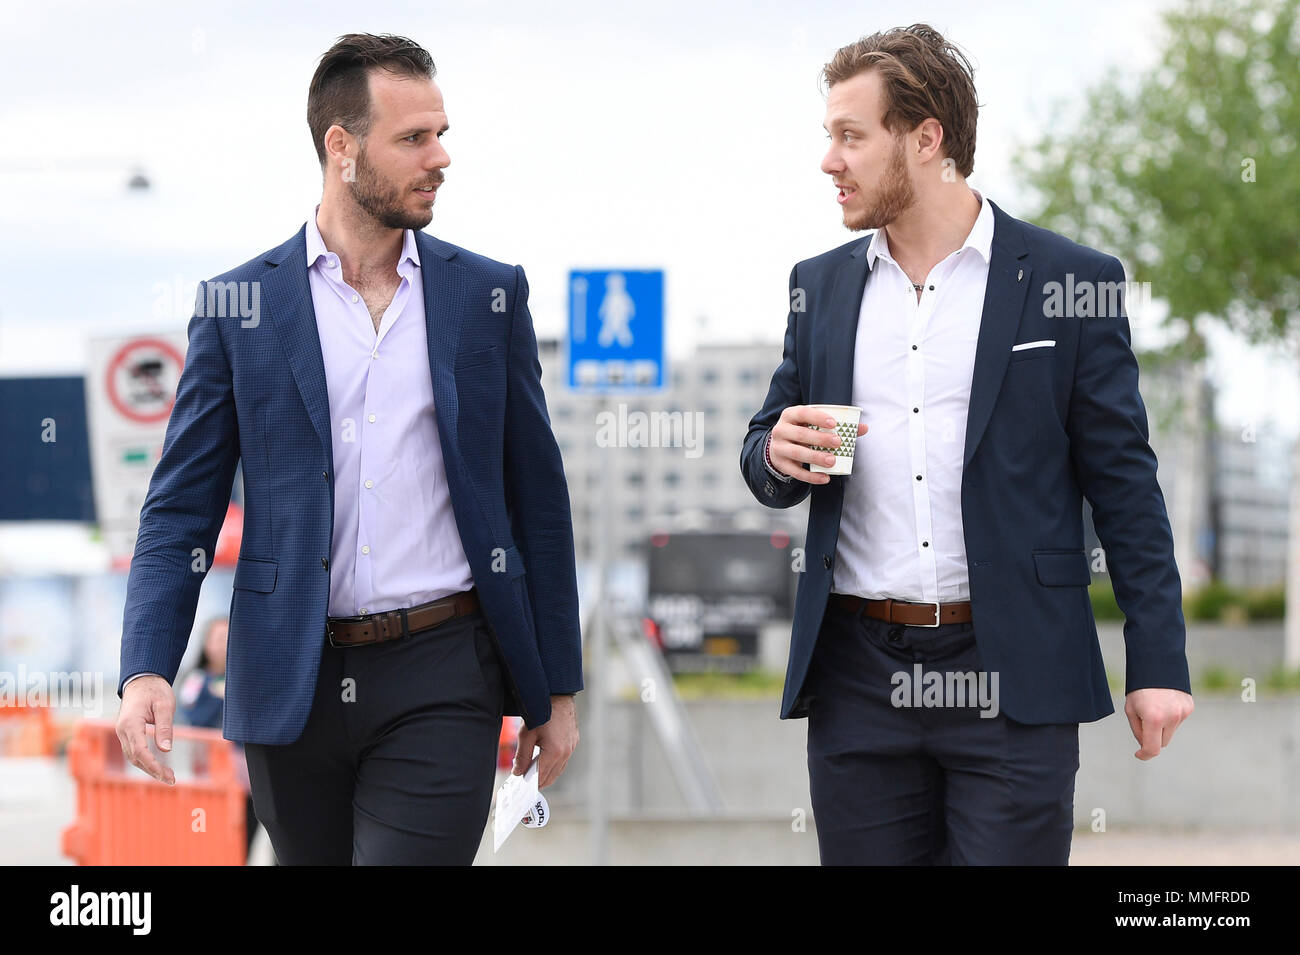 Why do hockey players wear suits? 